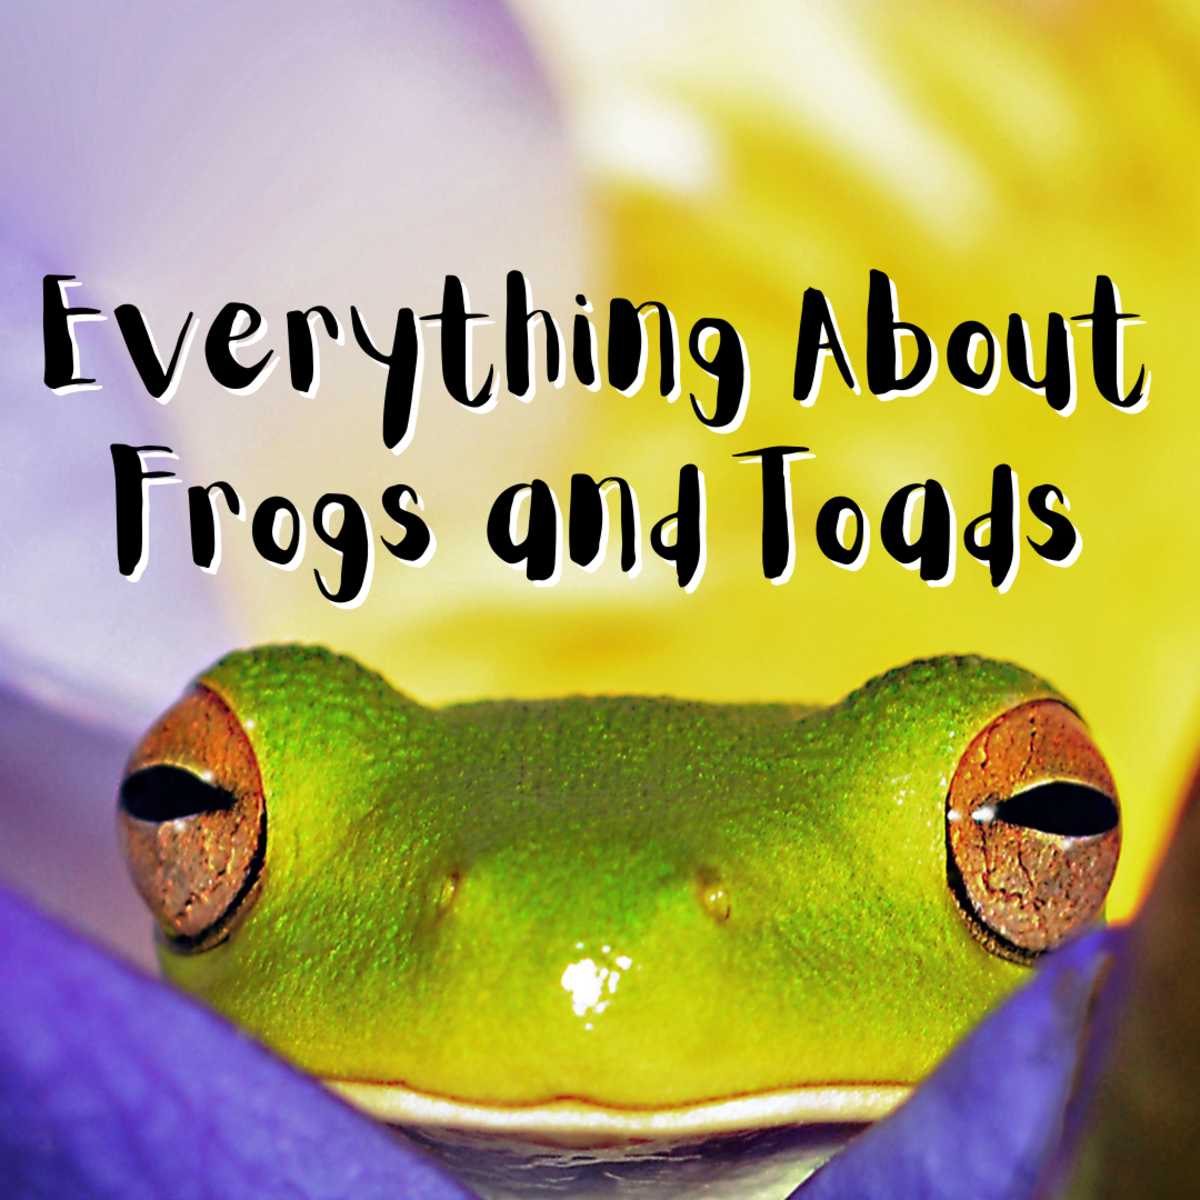 Frogs and Toads: Facts and Info